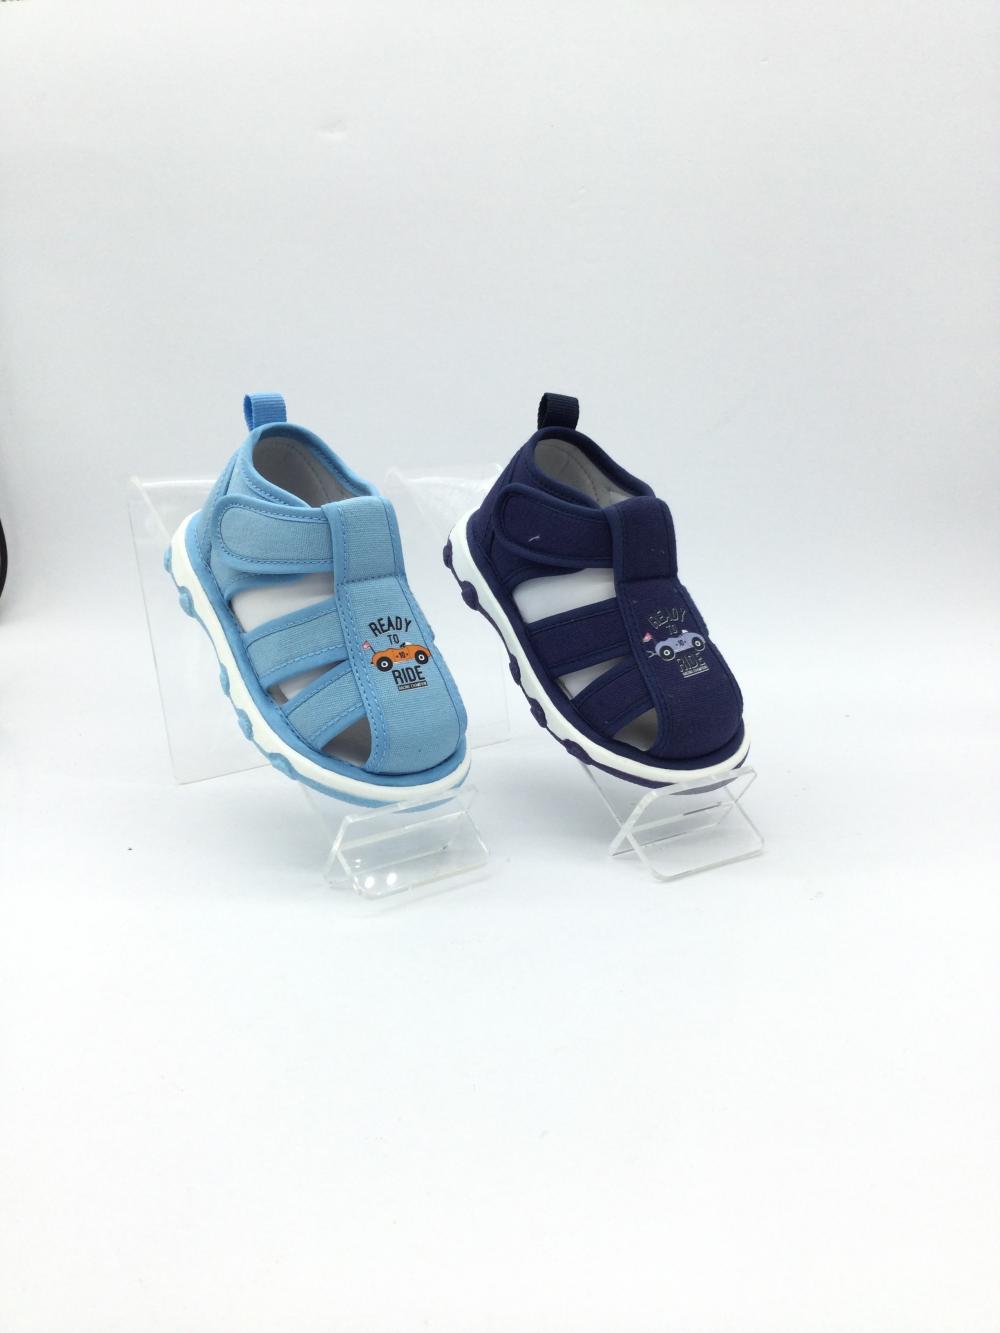 Fashion baby boy sandal with sound protect toe